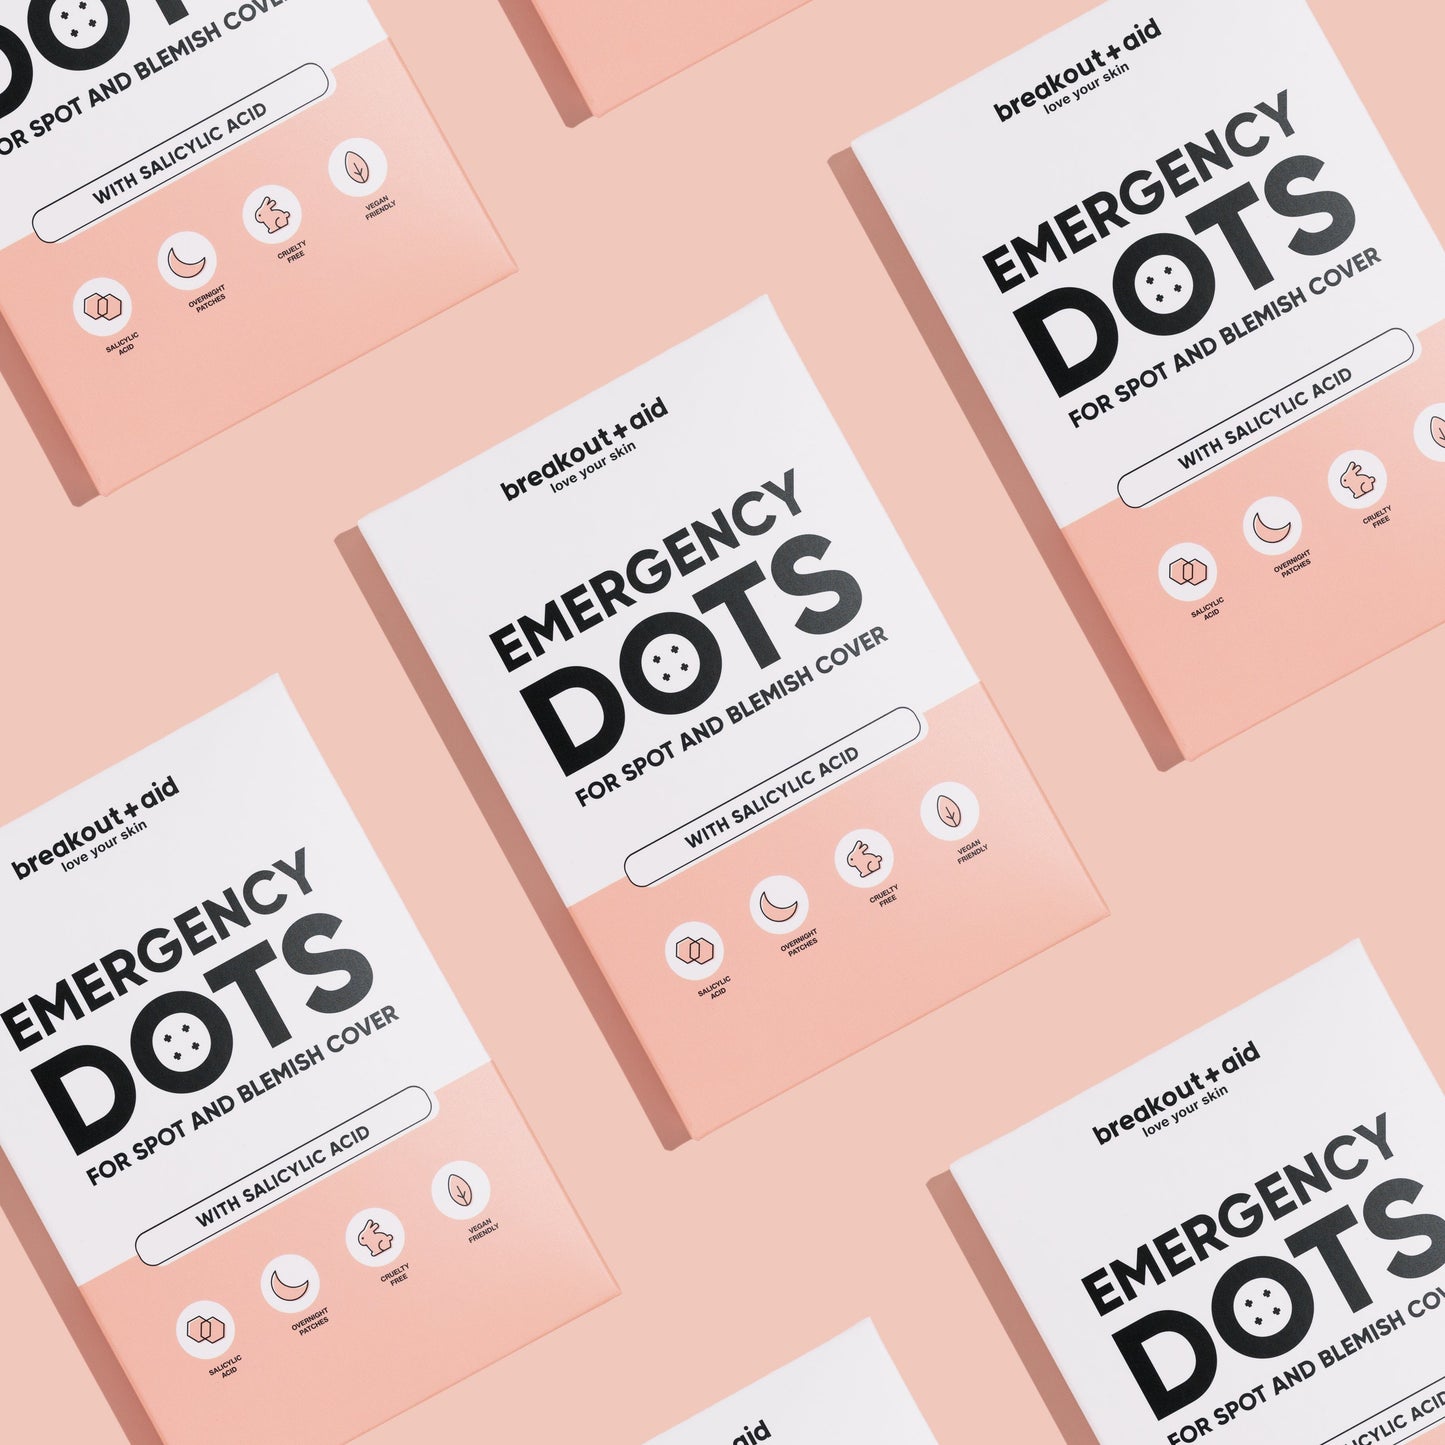 Emergency dots for spots and blemishes with Salicylic Acid breakoutaid 